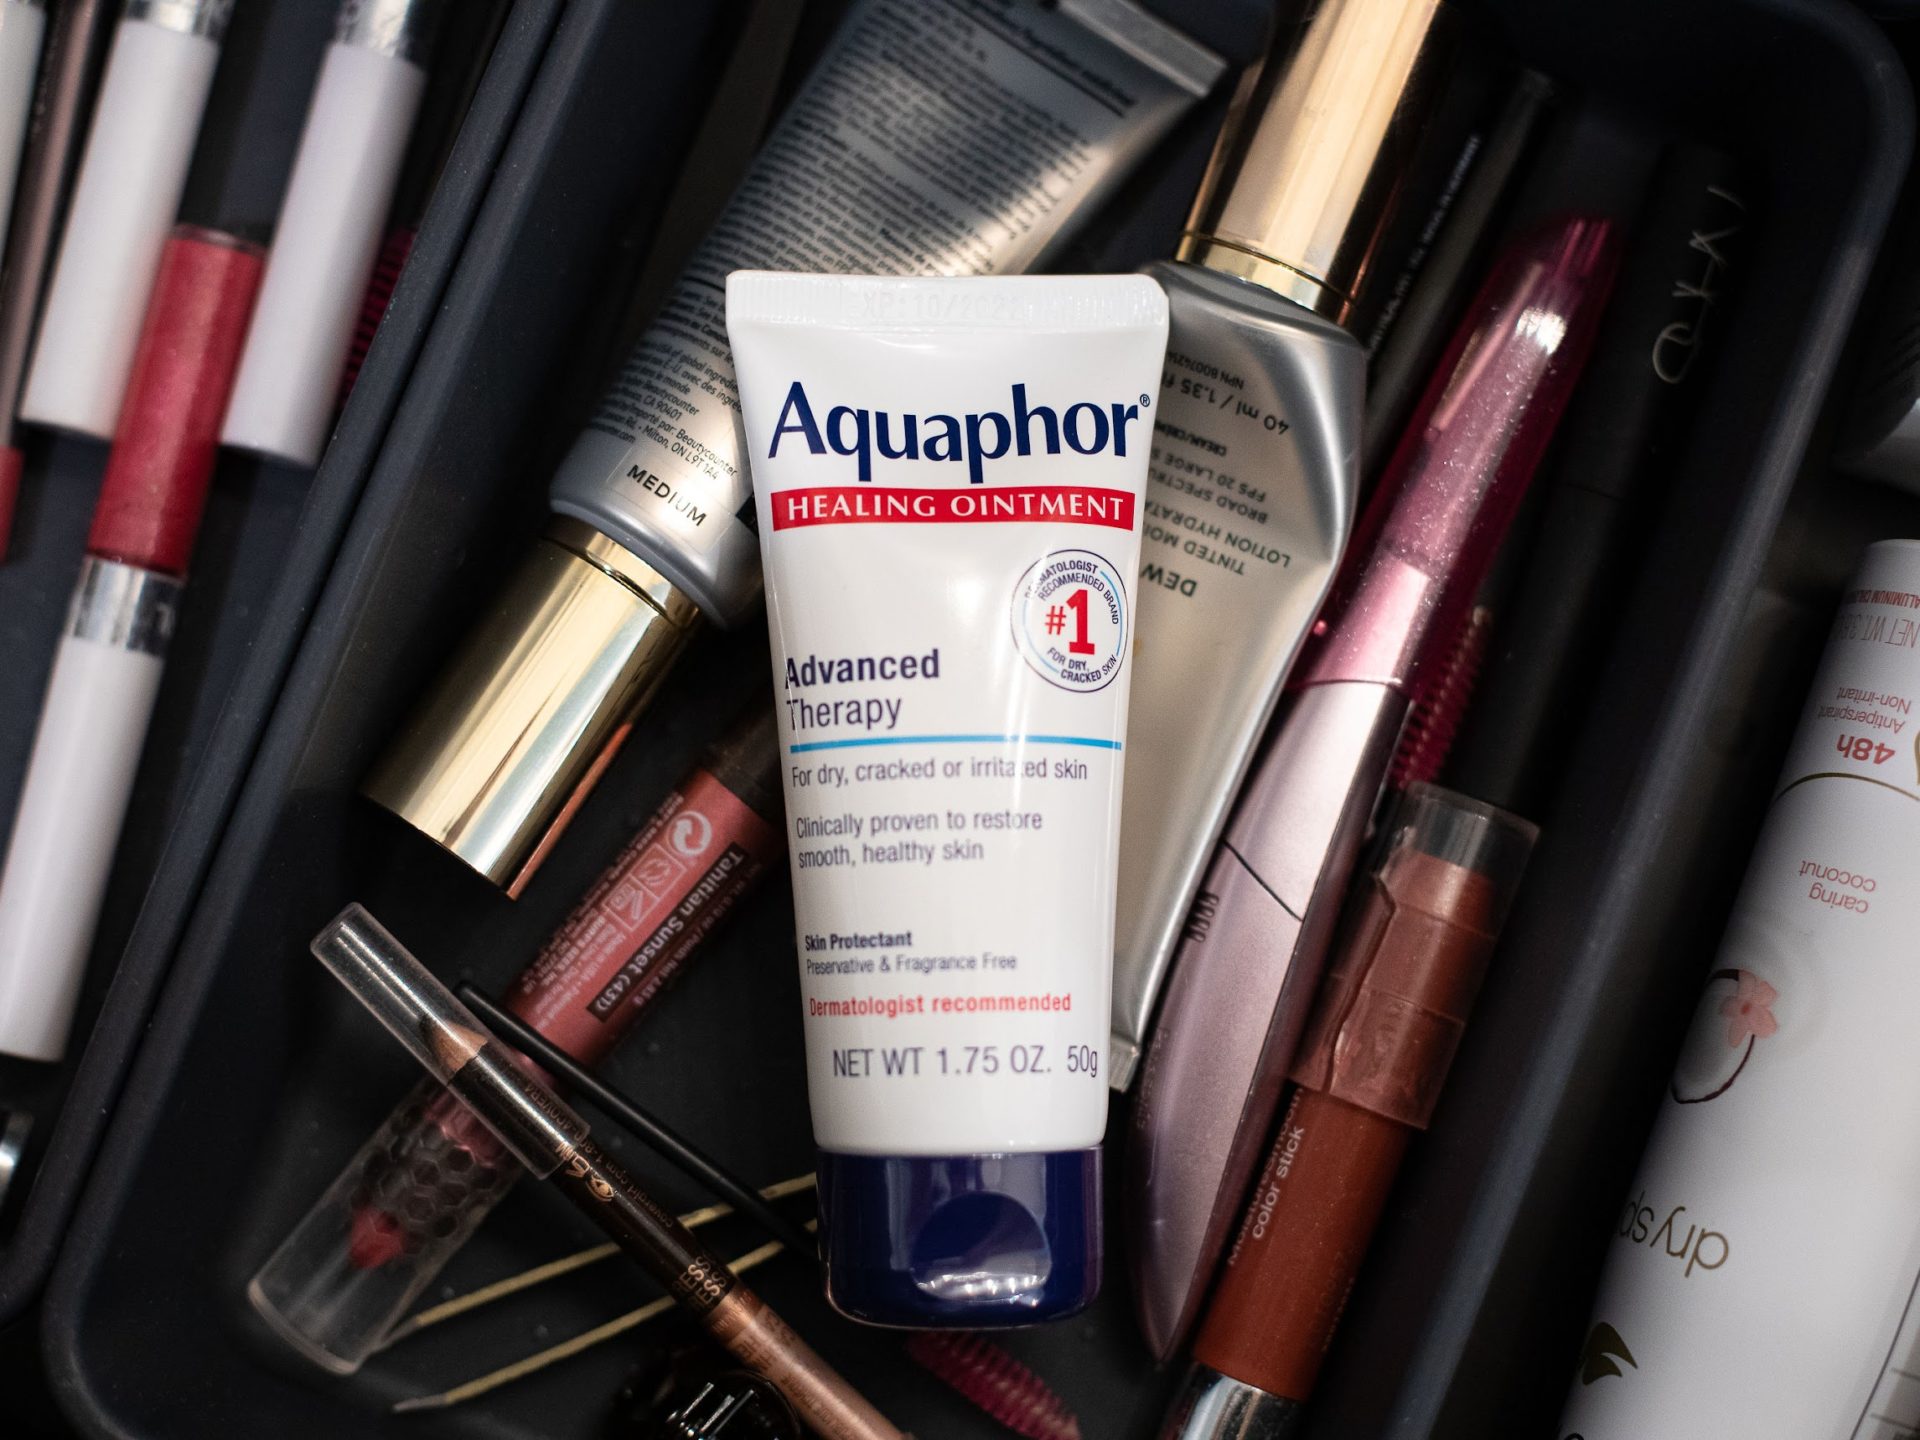 Aquaphor Healing Ointment As Low As $1.99 At Kroger